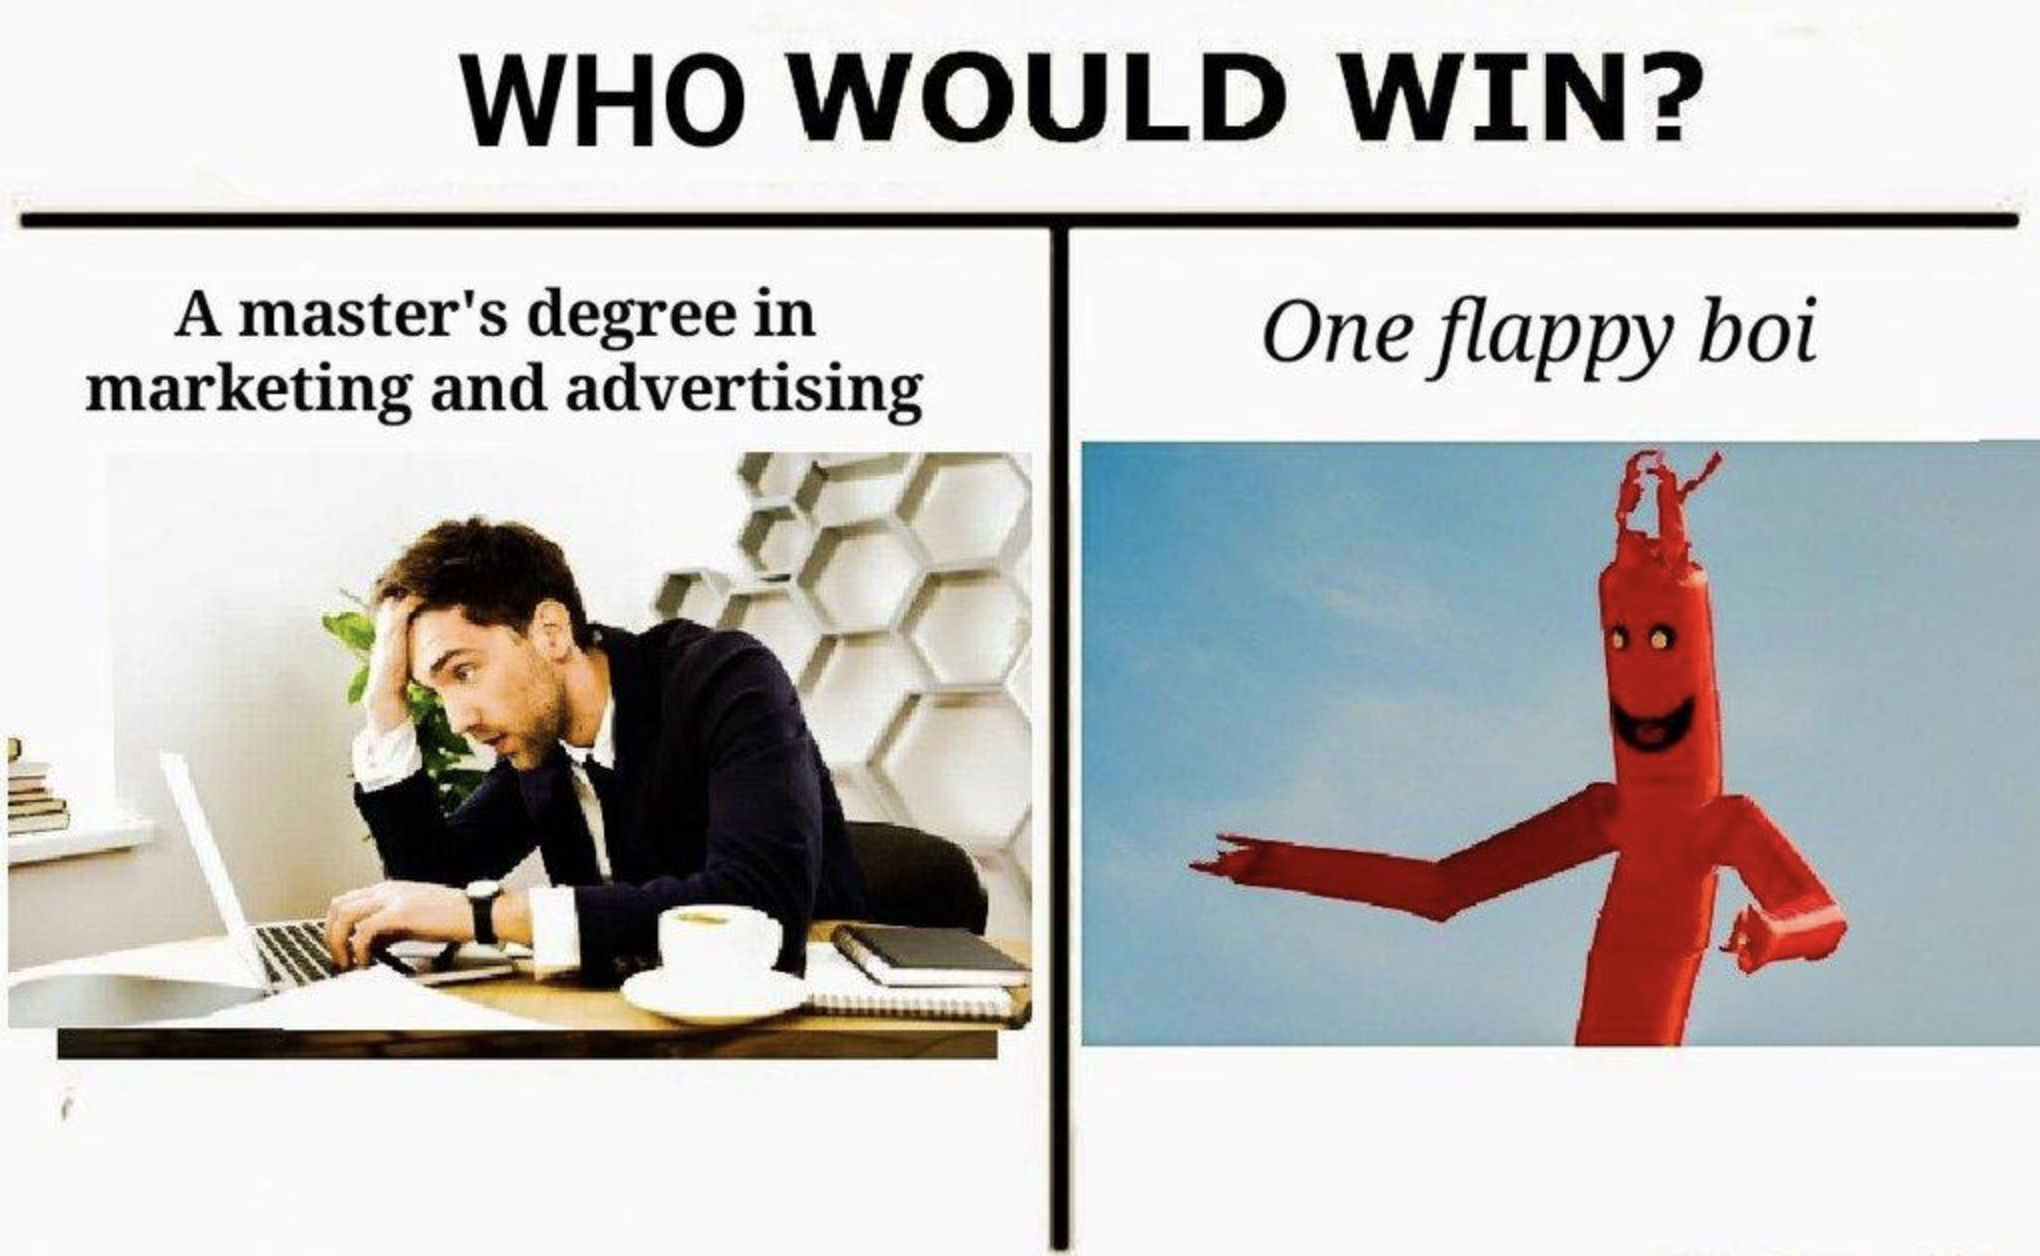 The interesting "who would win" meme features opposing subjects.